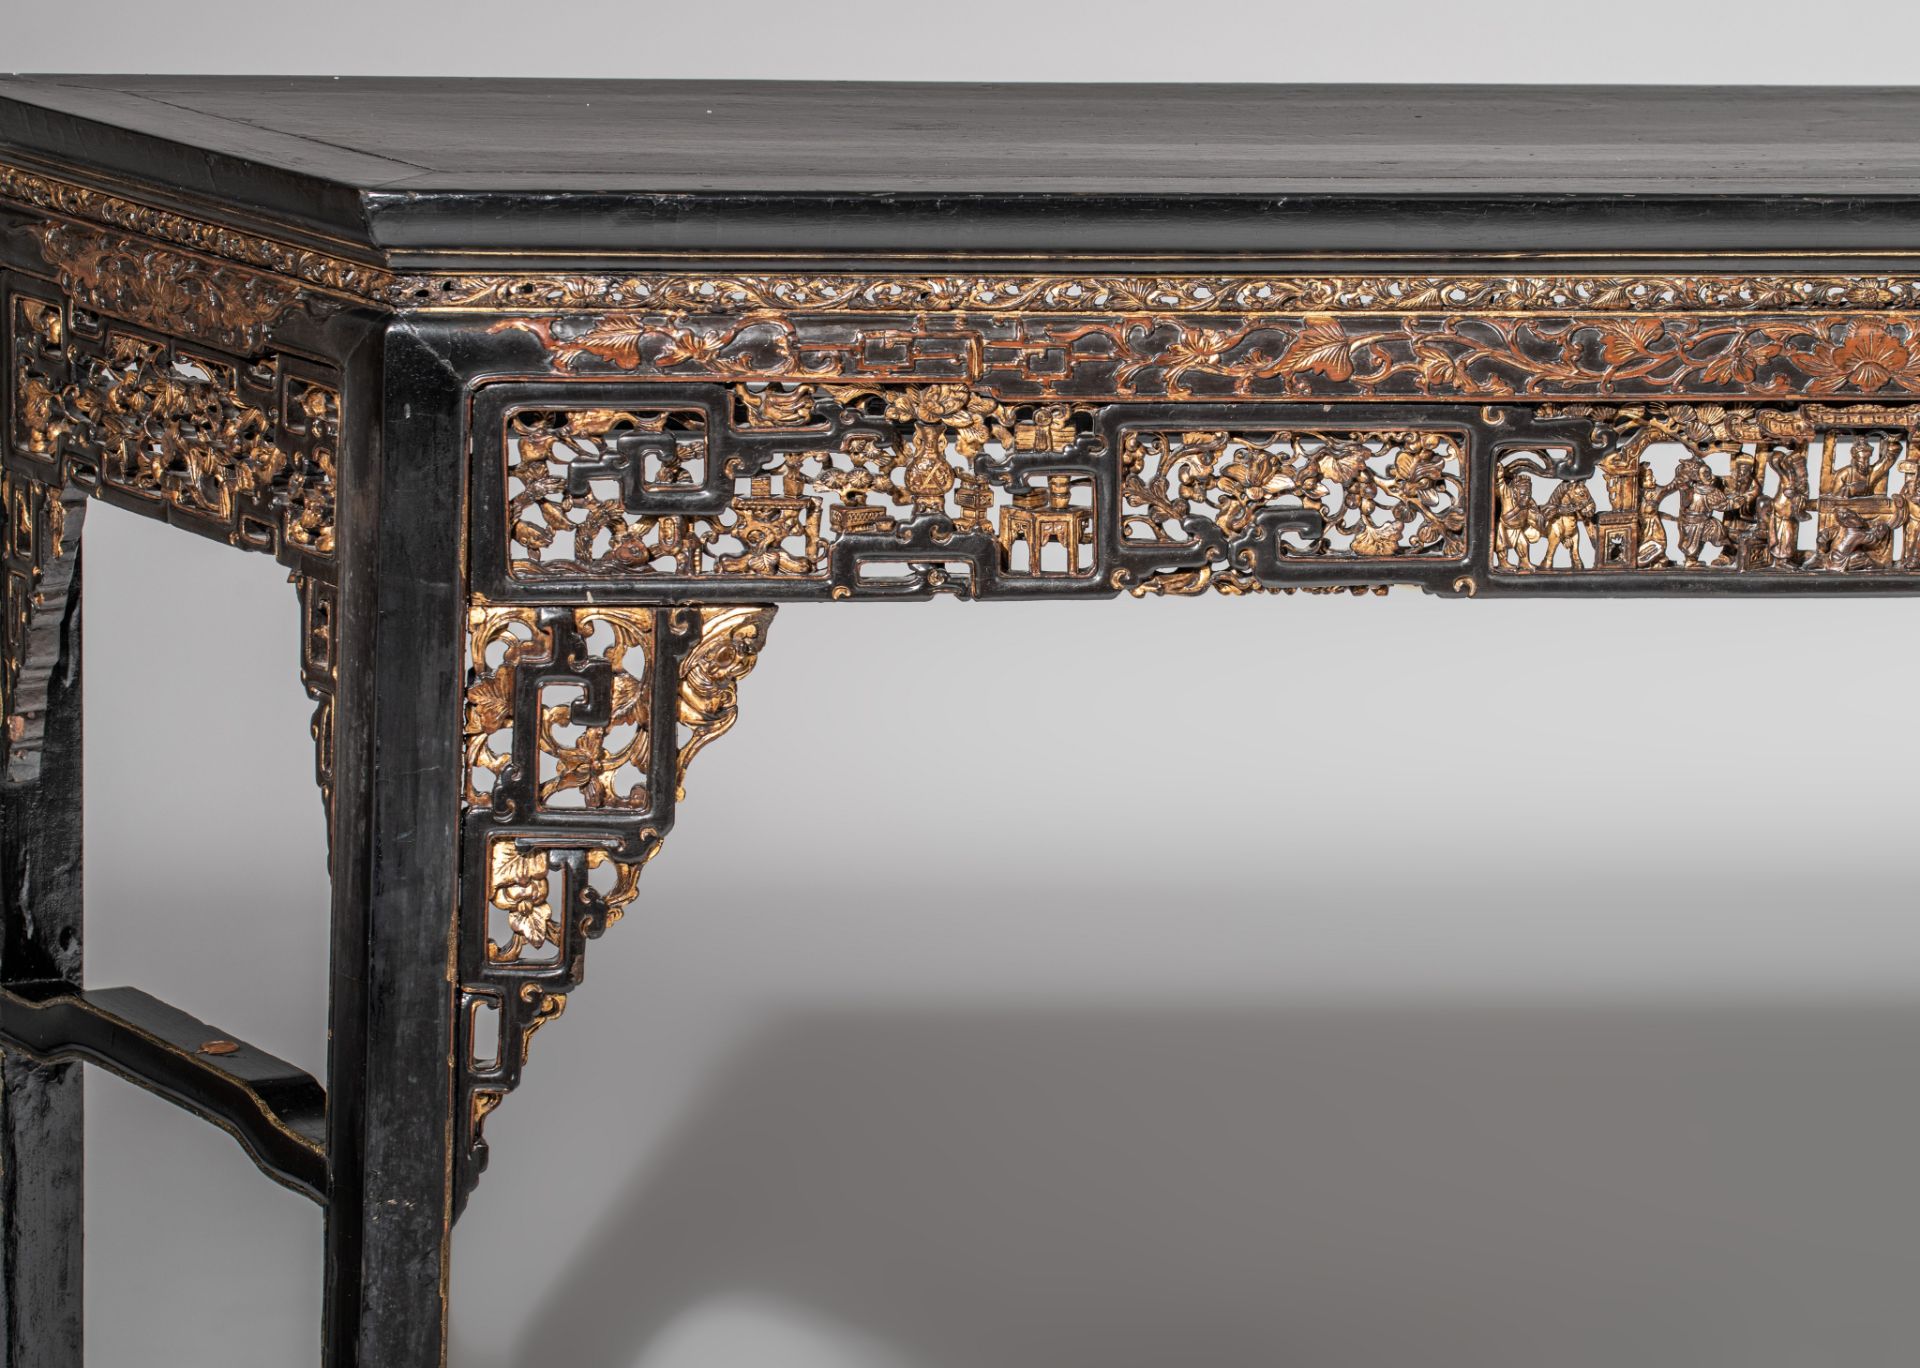 A Chinese gilt and lacquered carved side table, late Qing/Republic period, H 107 - L 187 - D 40 cm - Image 8 of 10